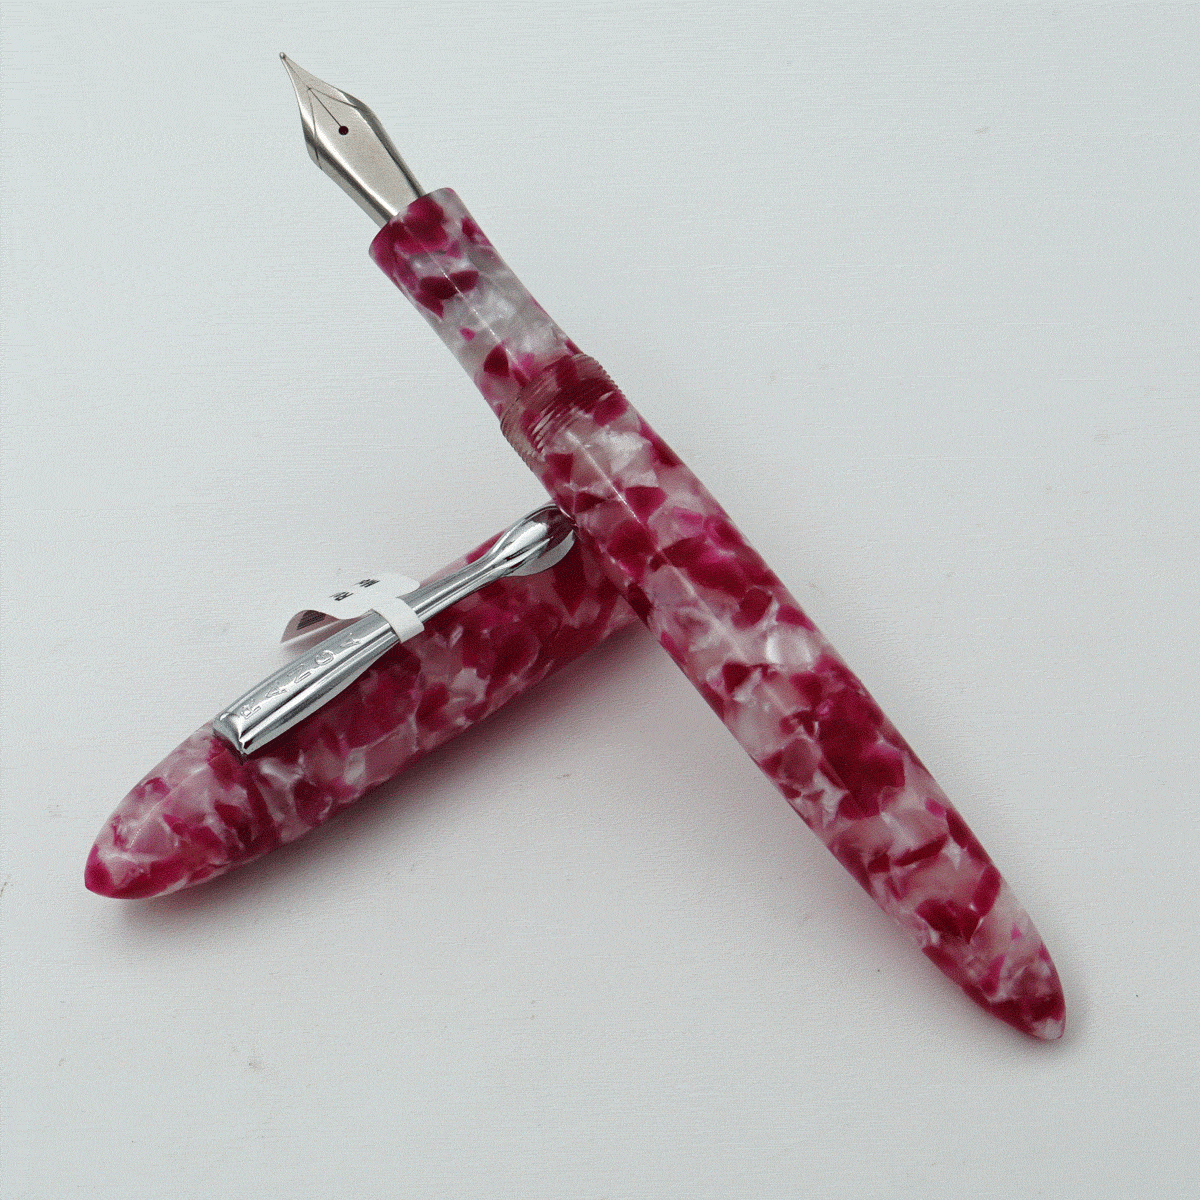 Ranga Handmade Model 8B Premium Acrylic P57 Pink White Cracked Ice Color Body With Silver Clip German Jowo Nib Converter Type Fountain Pen (Nib Can be Customized With Fine or Medium or Broad) SKU 24264